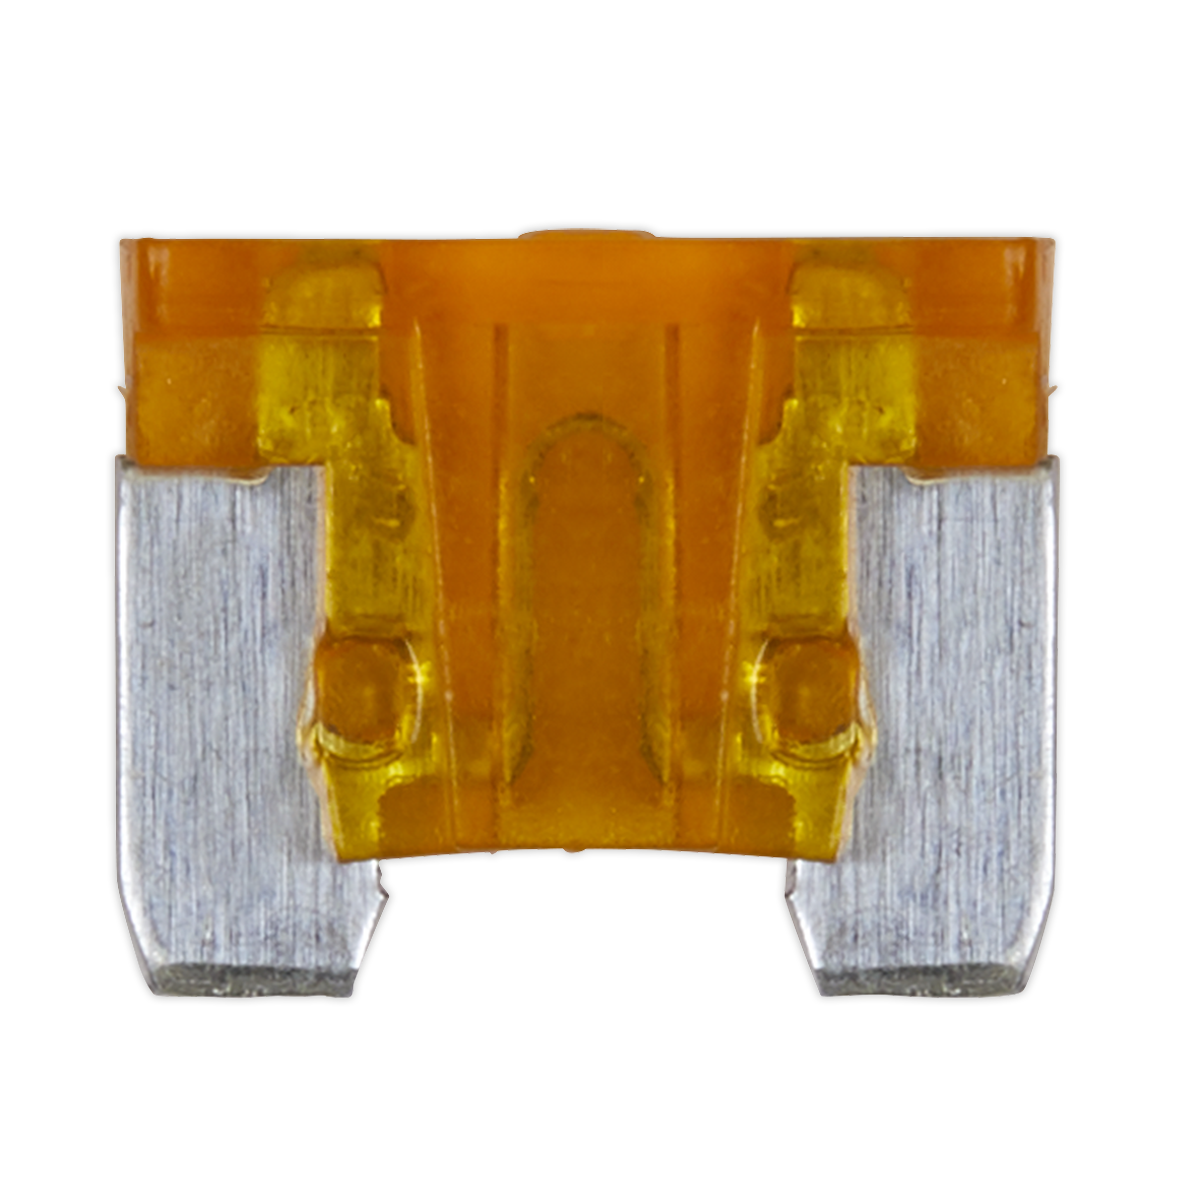 Sealey Automotive MICRO Blade Fuse 5A - Pack of 50 MIBF5